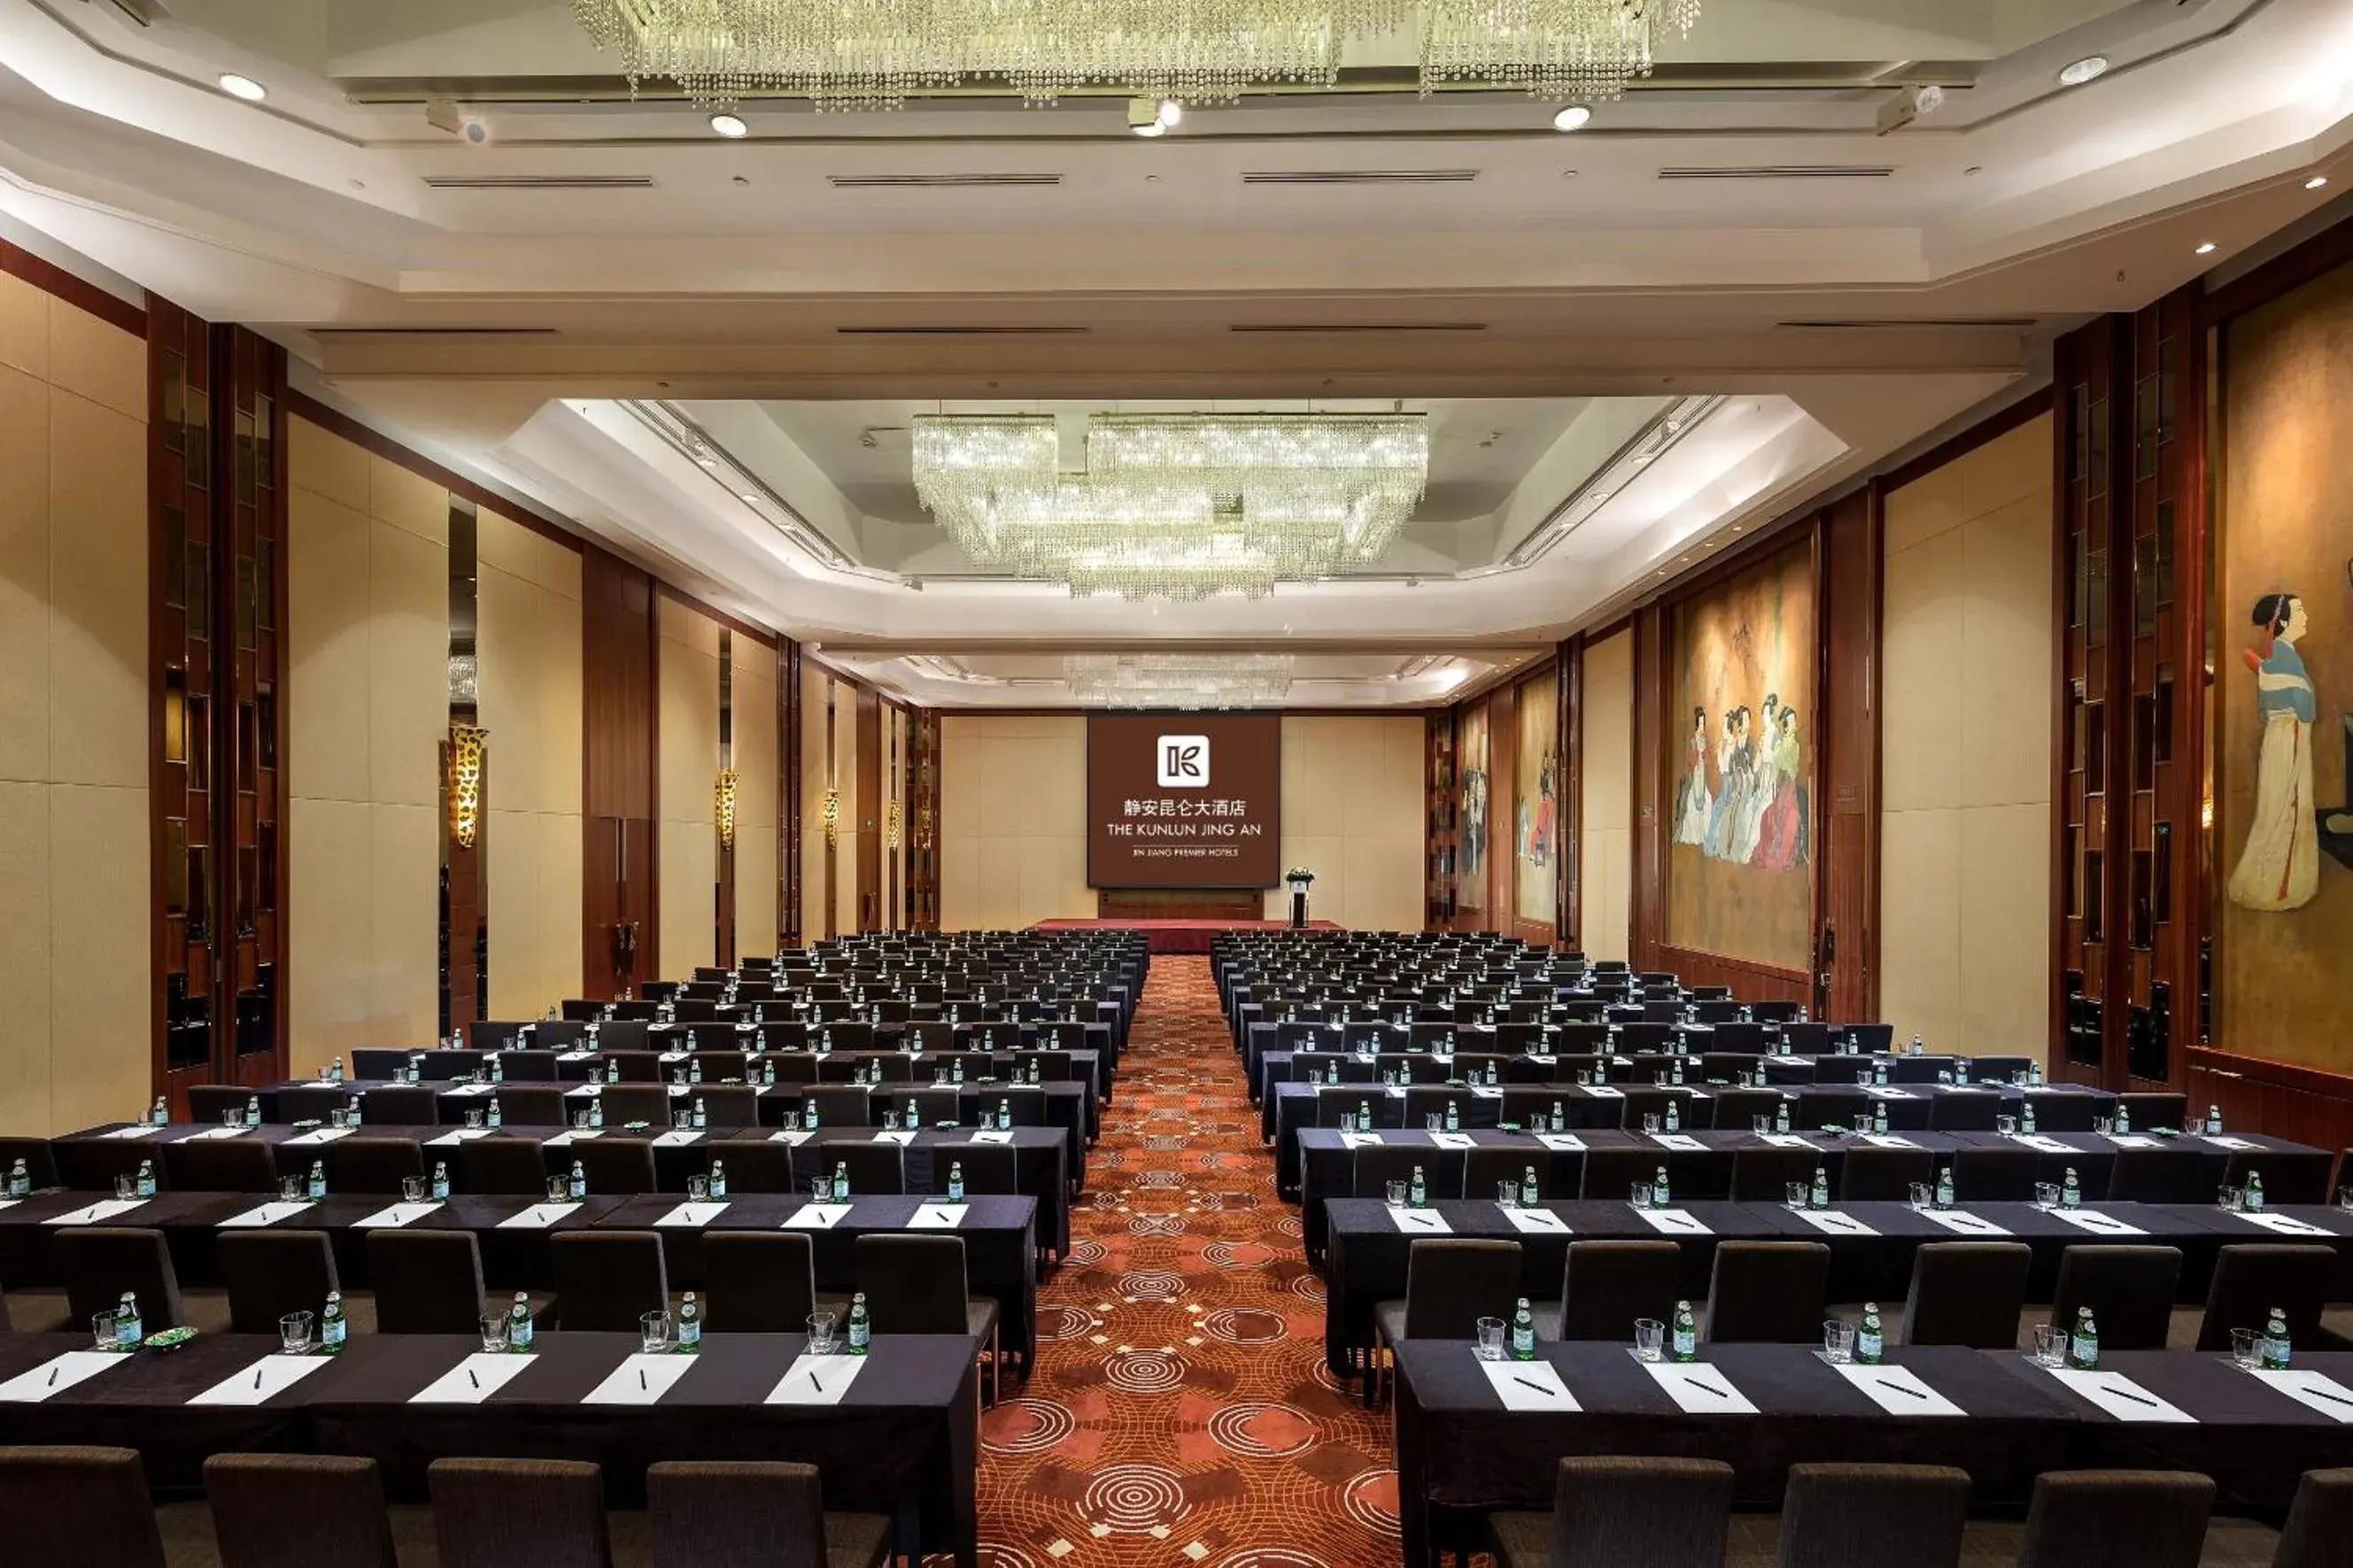 Meeting/conference room in The Kunlun Jing An